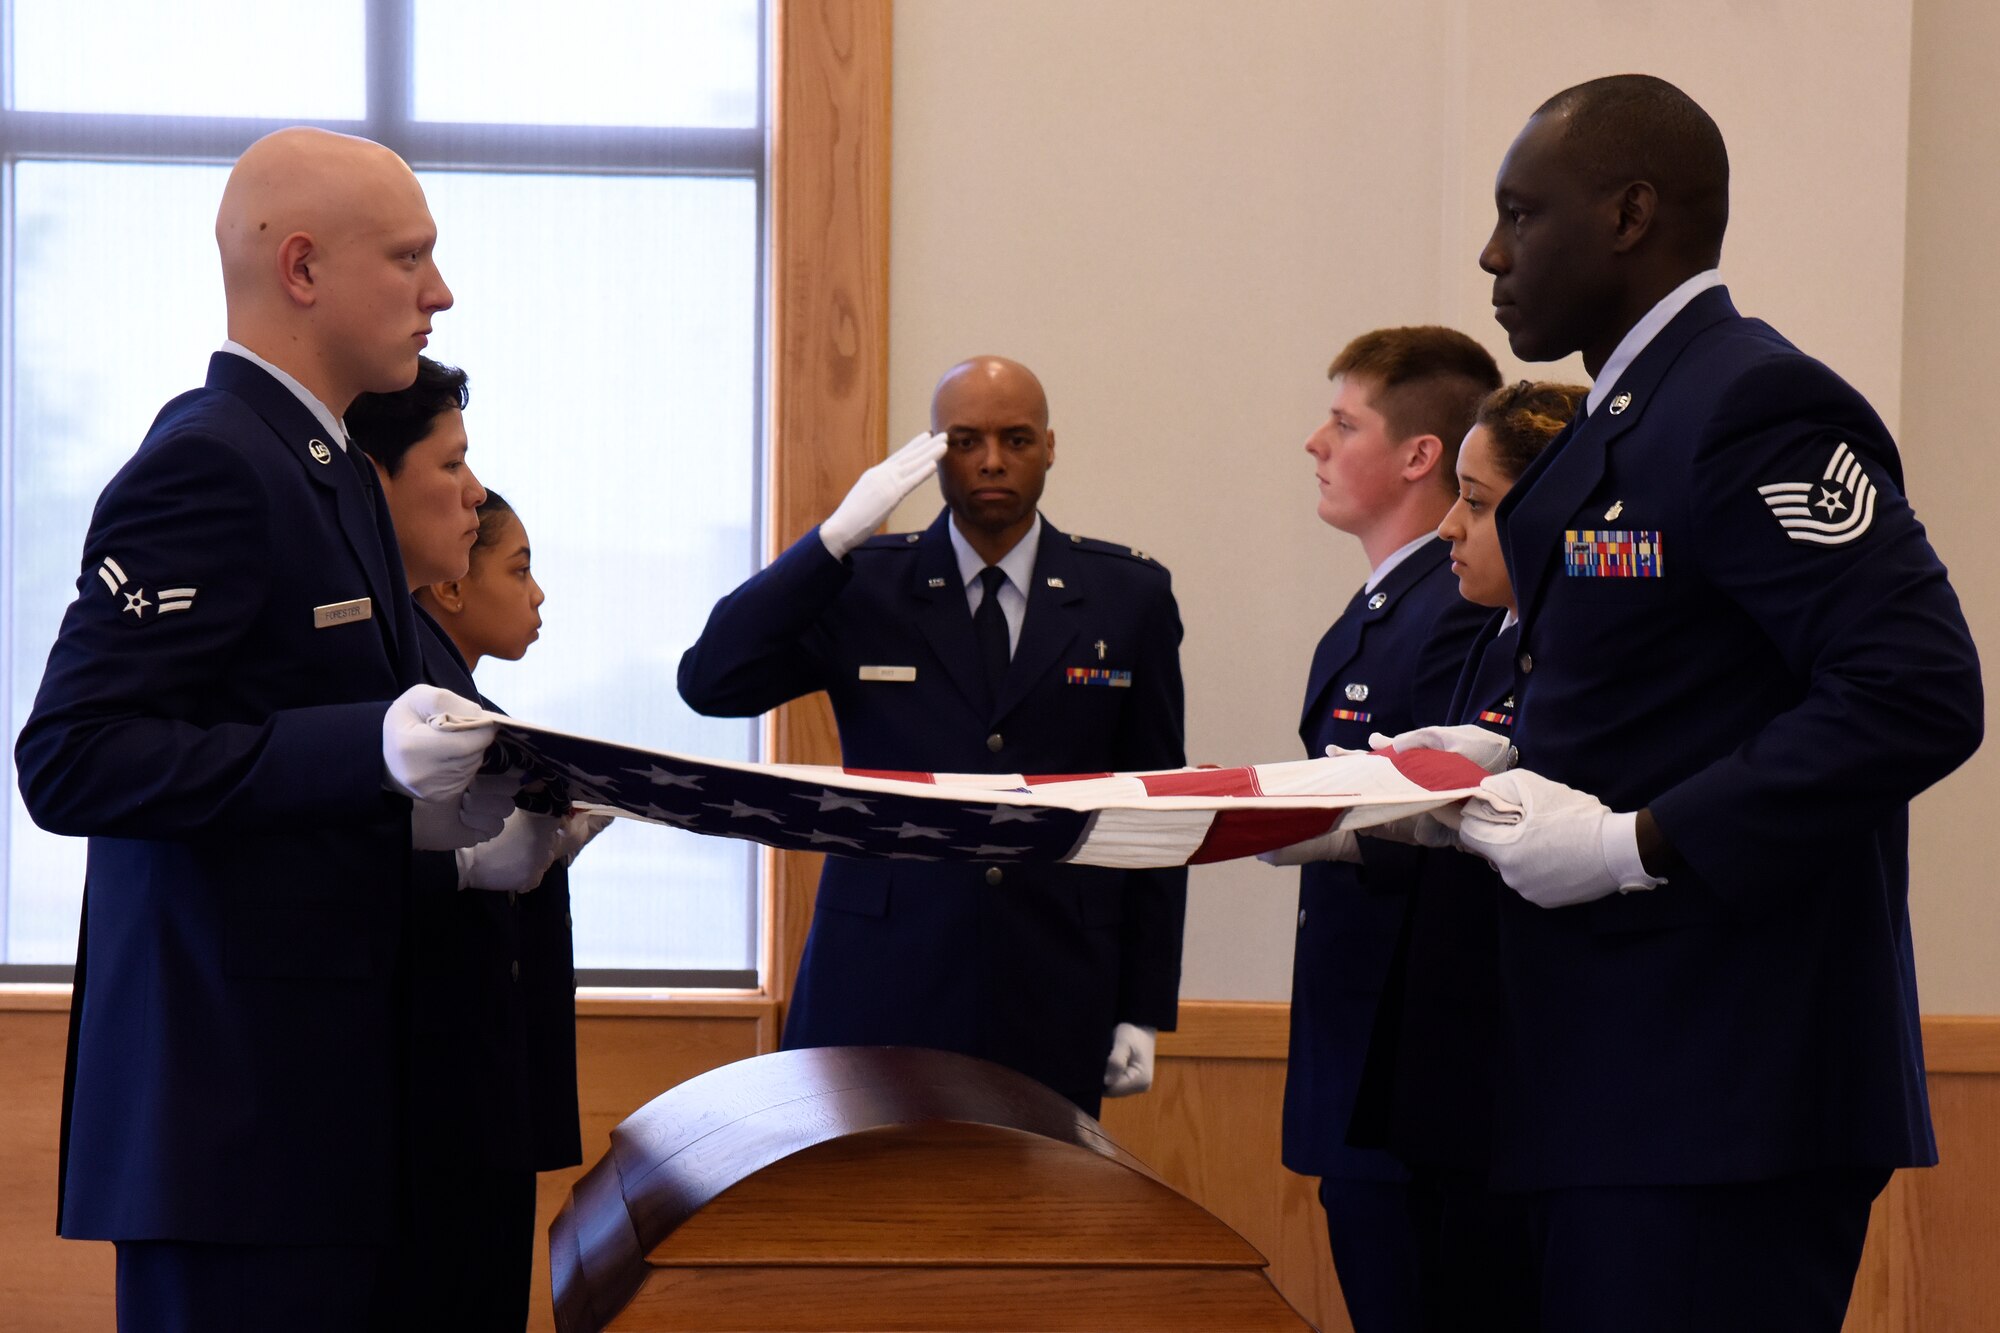 Airmen of the 127th Wing Honor Guard participate in a training course at Selfridge Air National Guard Base, Mich., May 15, 2015. The Selfridge Honor Guard renders final honors at the funerals of about 300 Air Force veterans every year in the Detroit area. The honor guard also participates in many military ceremonies on the base and in the community every year. (U.S. Air National Guard photo by Terry Atwell)